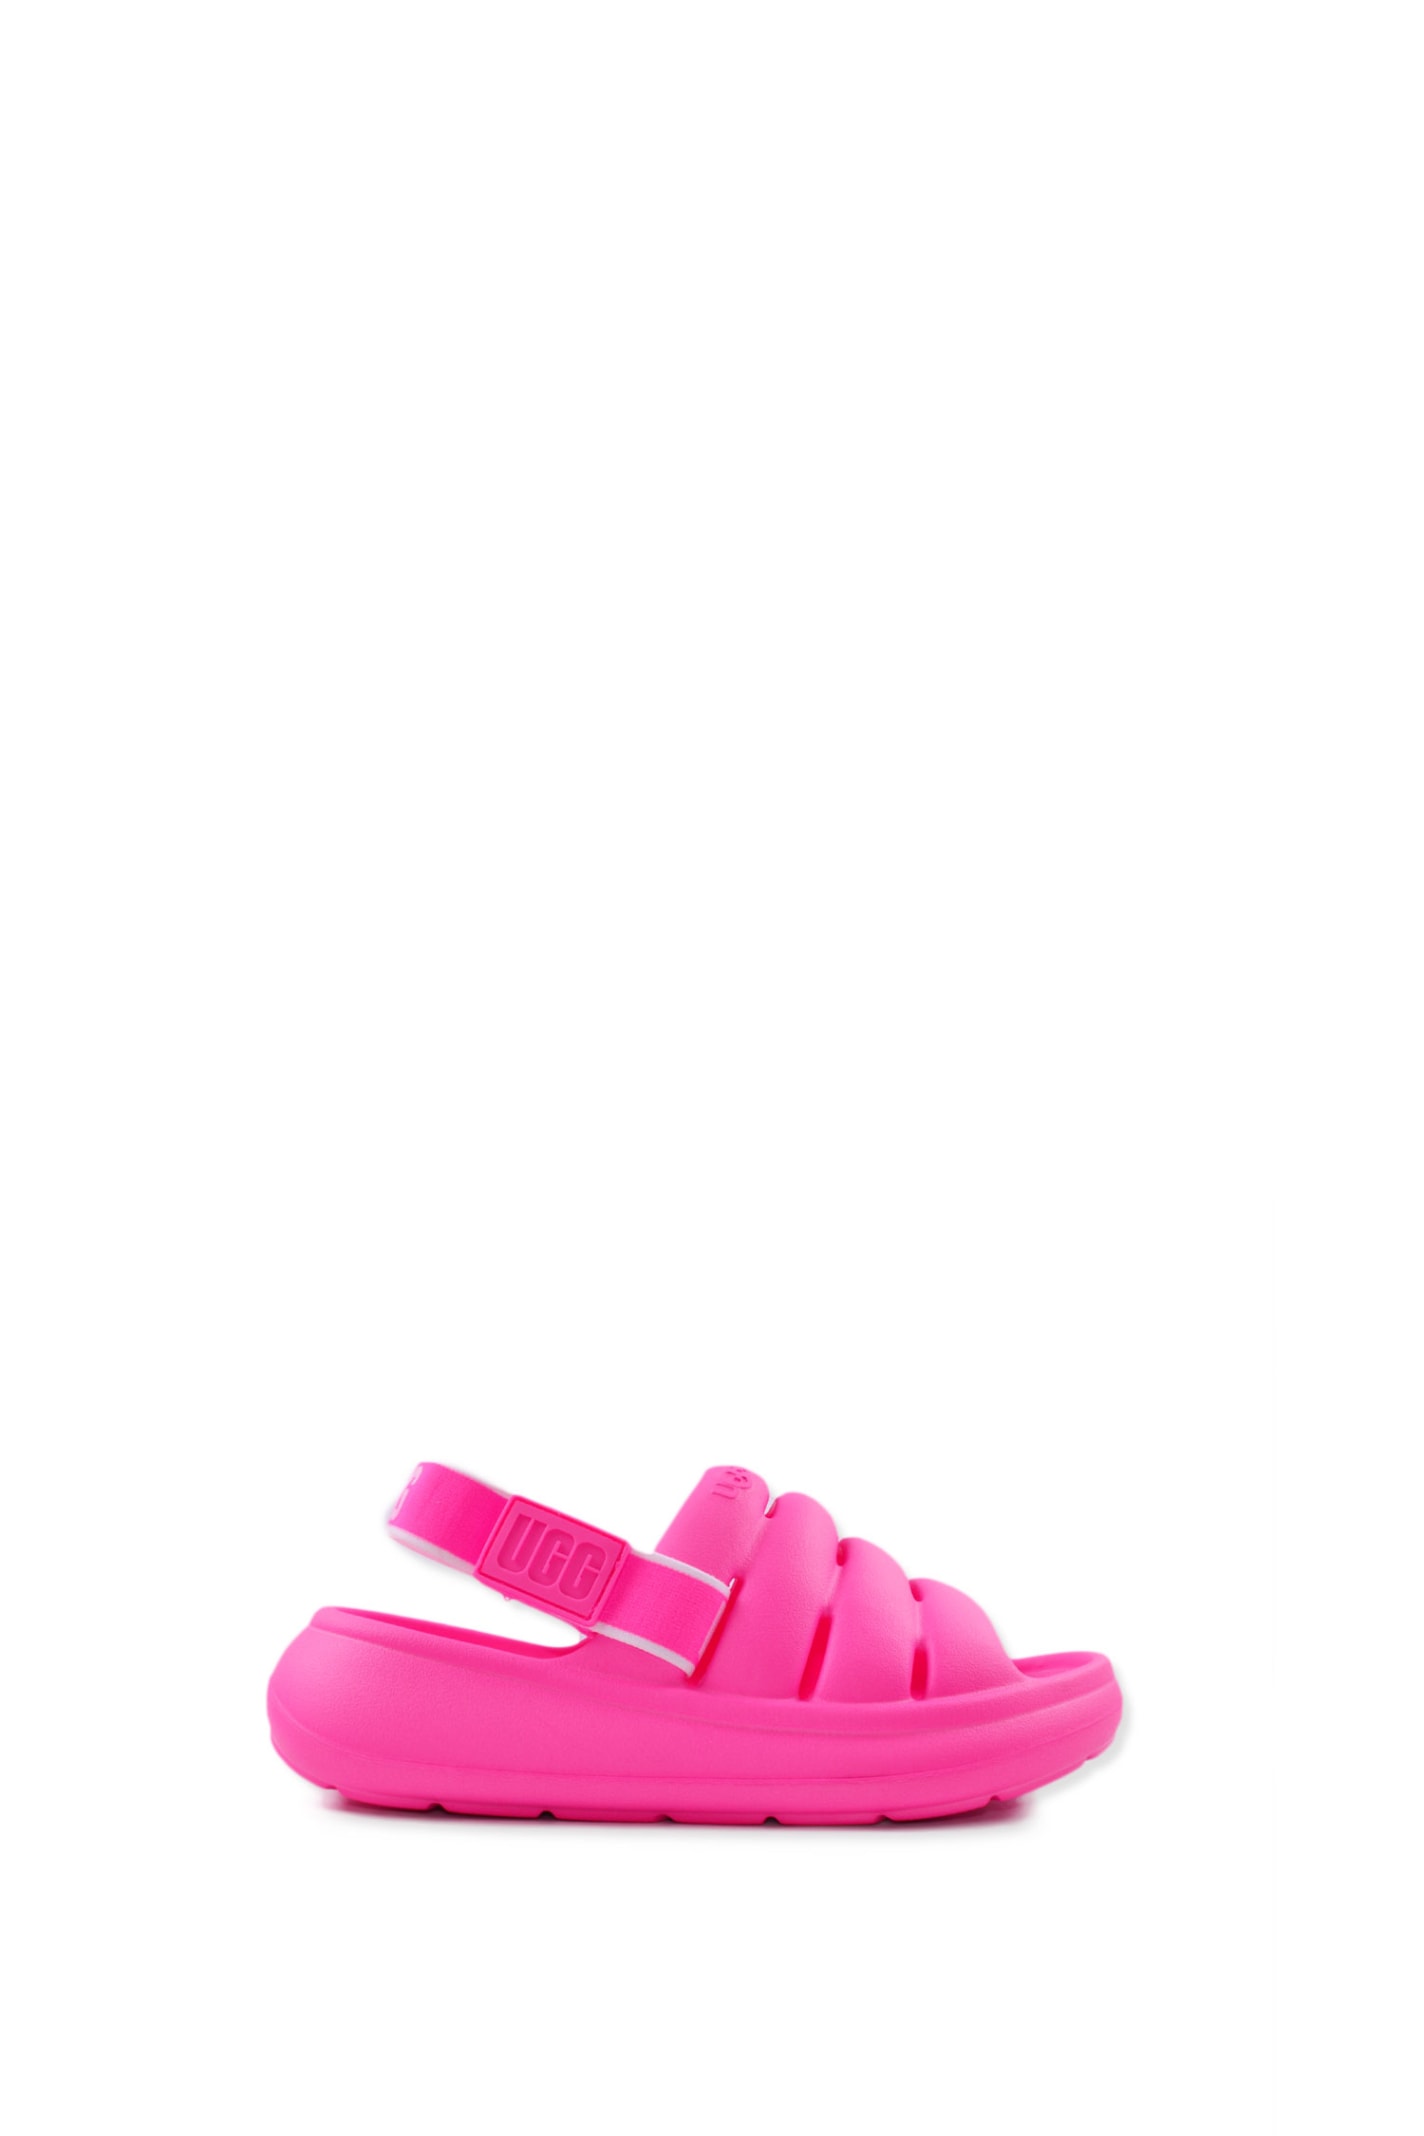 Ugg Kids' Sandals With Strap In Rose